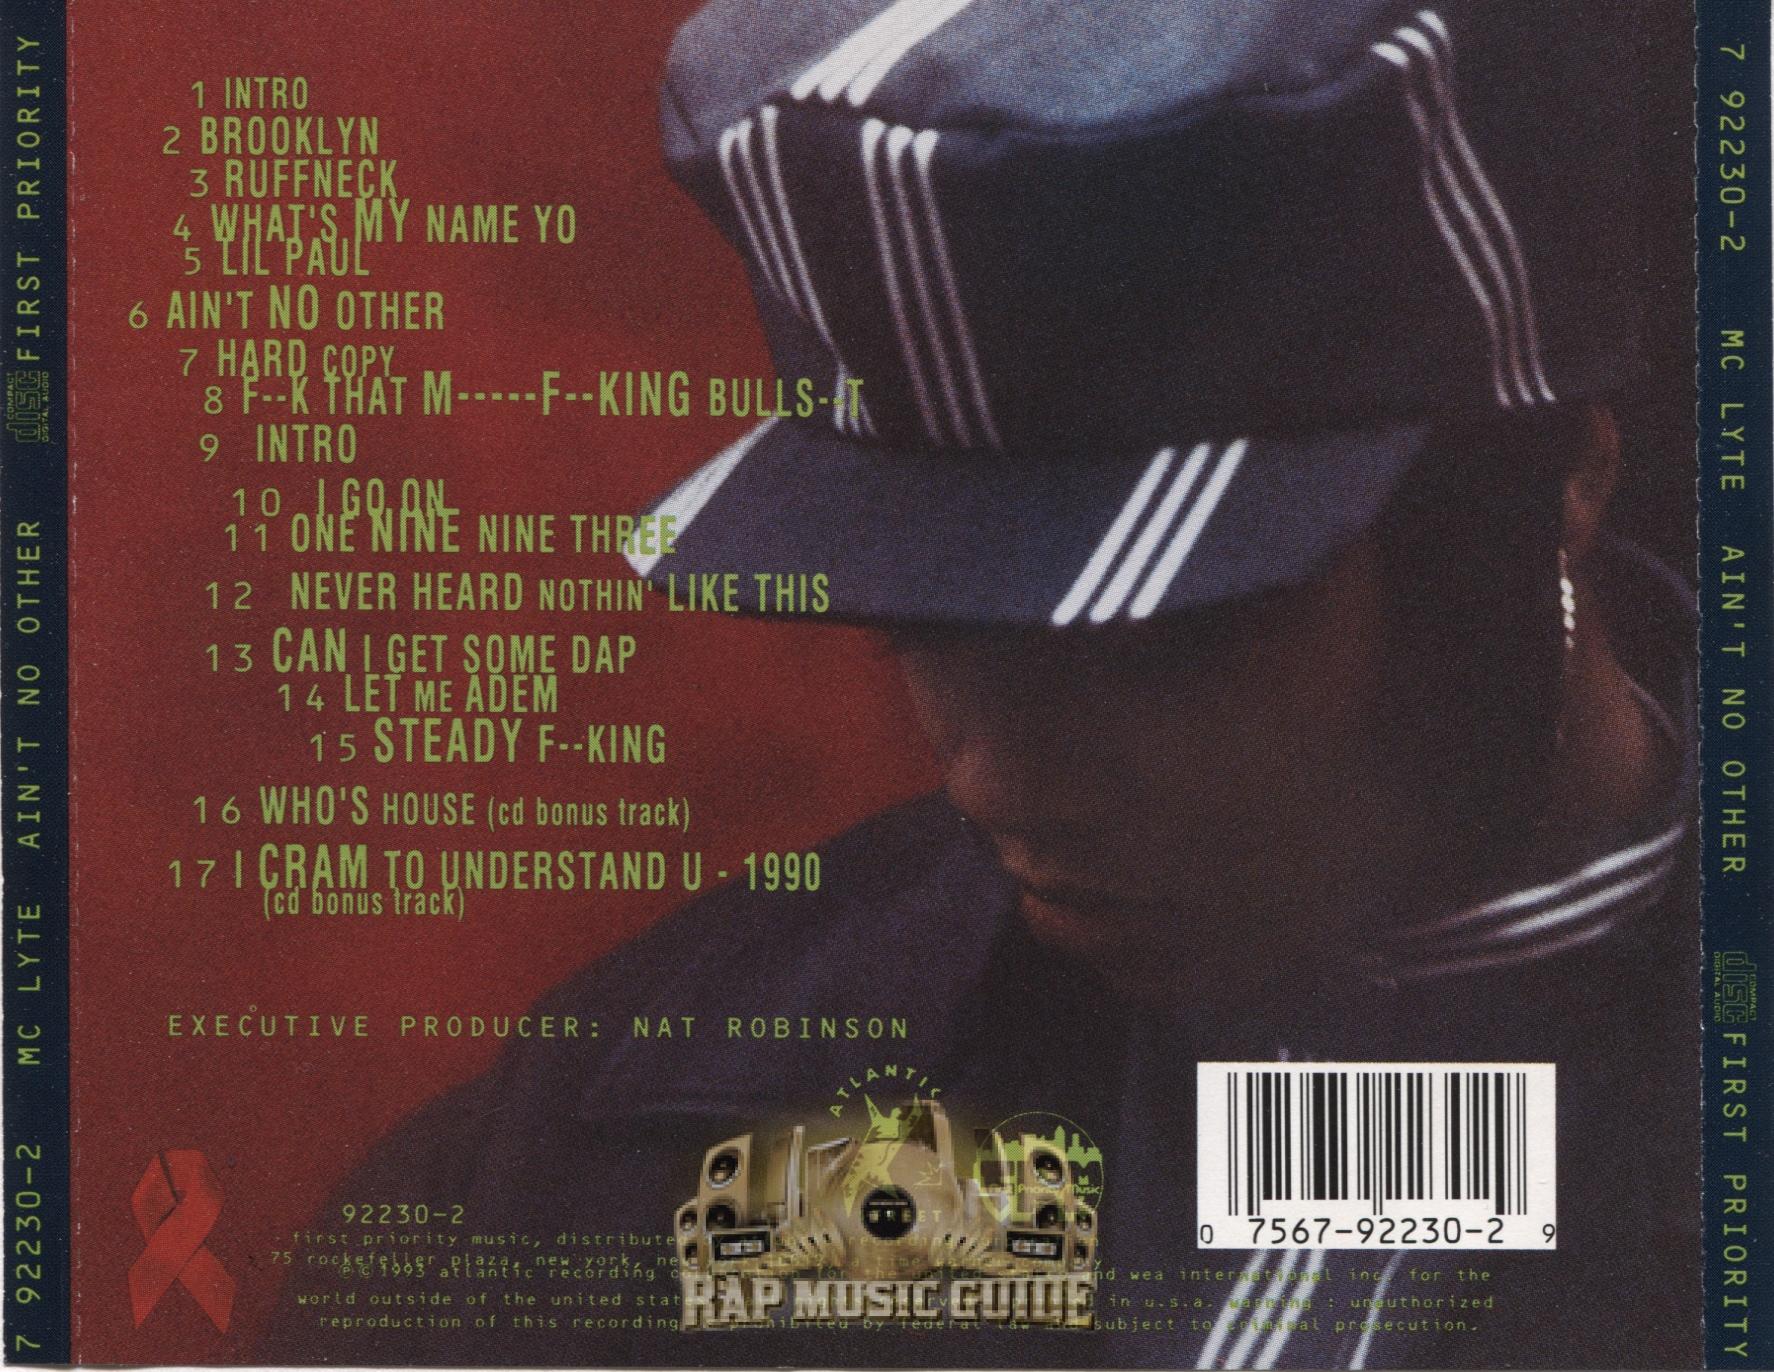 MC Lyte - Ain't No Other: CD | Rap Music Guide